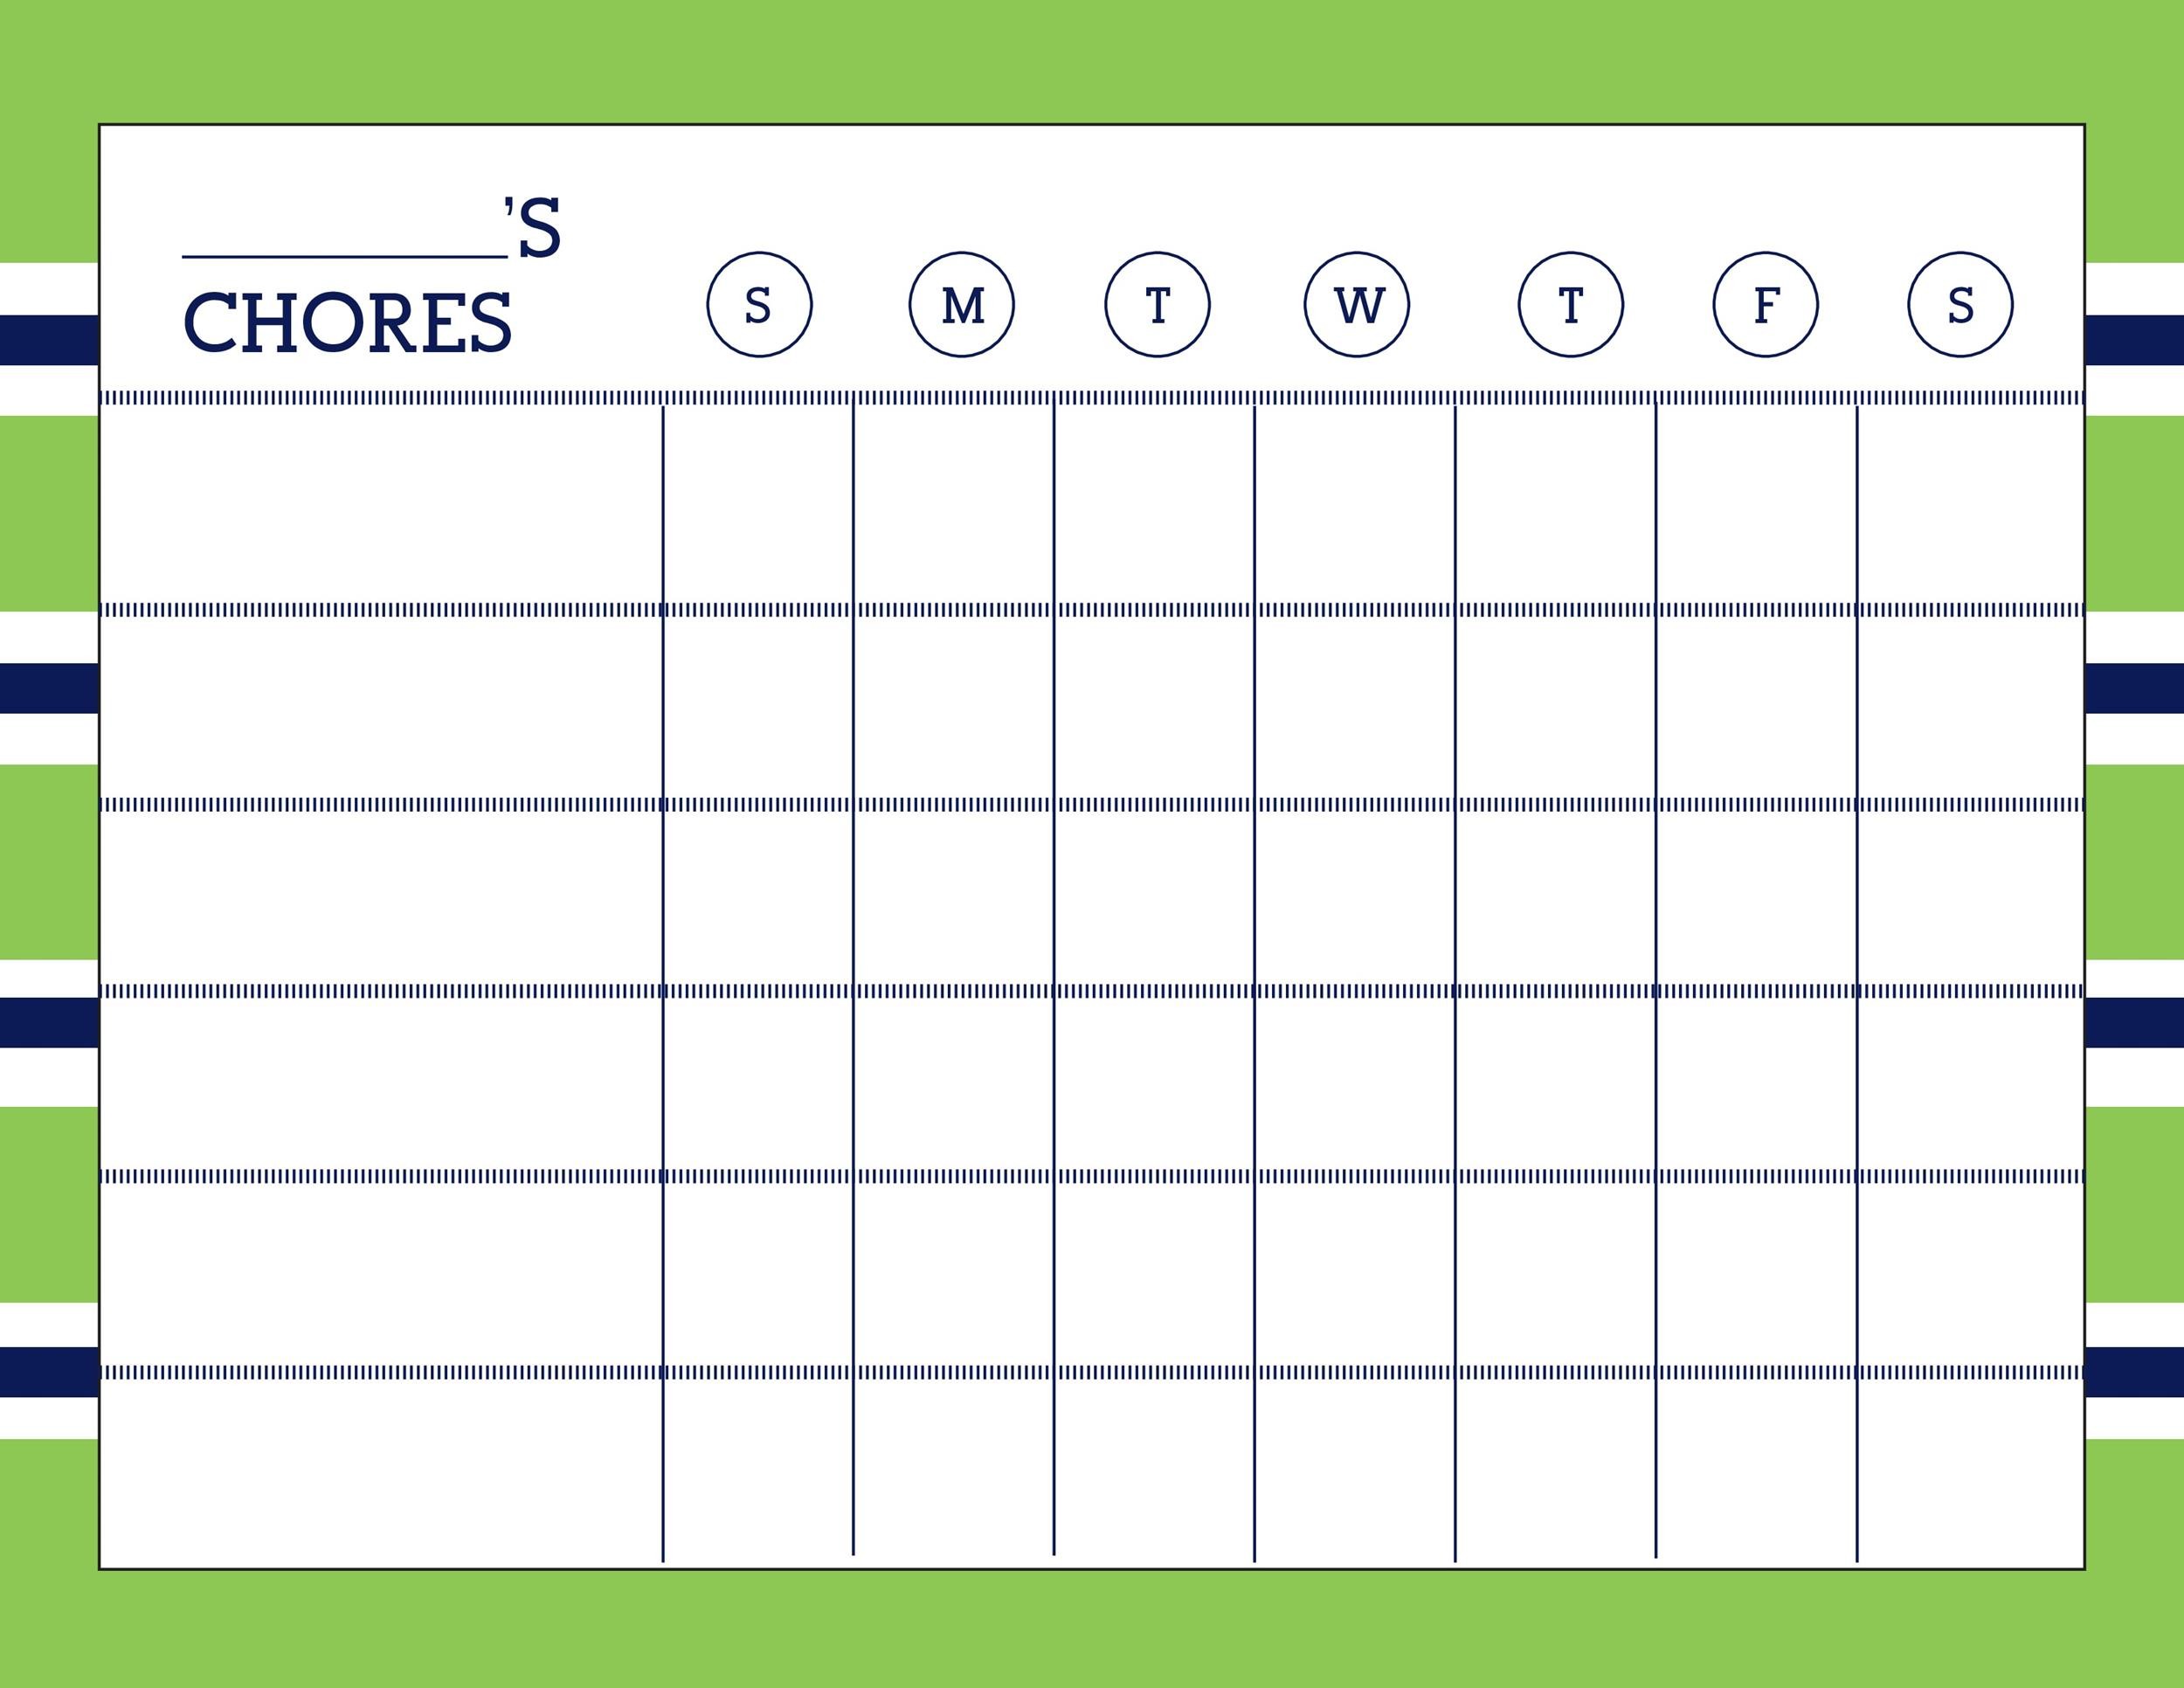 46 FREE Chore Chart Templates For Kids TemplateLab